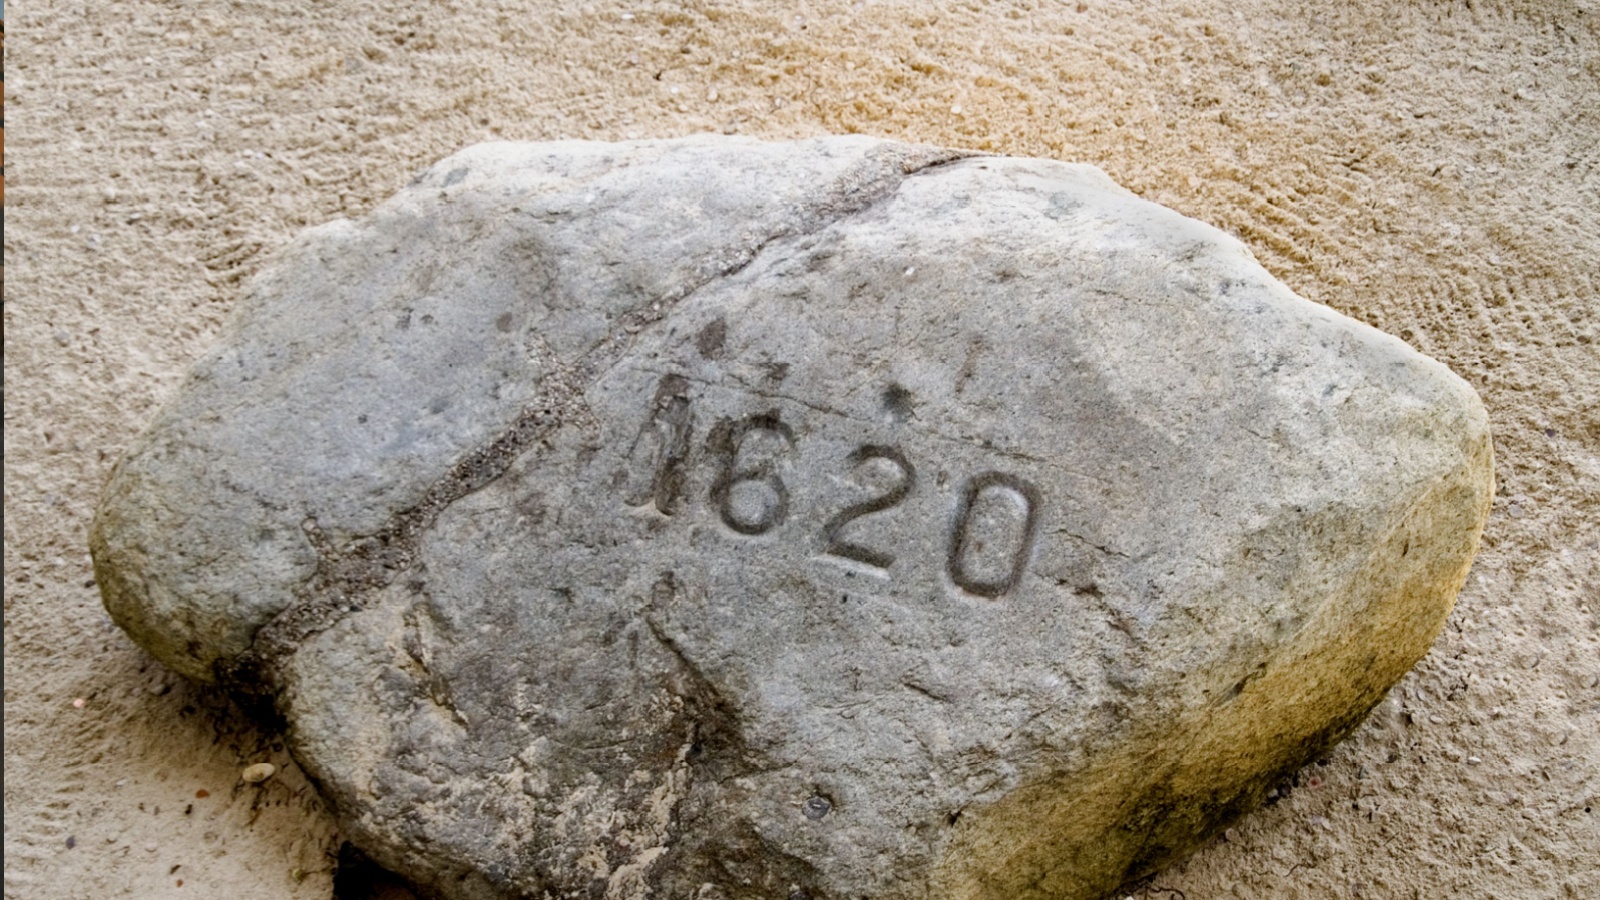 <p><span>Plymouth Rock is known as the “birthplace of America” and attracts thousands of visitors annually. However, this small rock is underwhelming and surrounded by a chain-link fence, making it difficult to take photos. Want to have a better time in Plymouth? Visit the Plimoth Plantation, a living history museum that offers a more immersive and educational experience.</span></p>